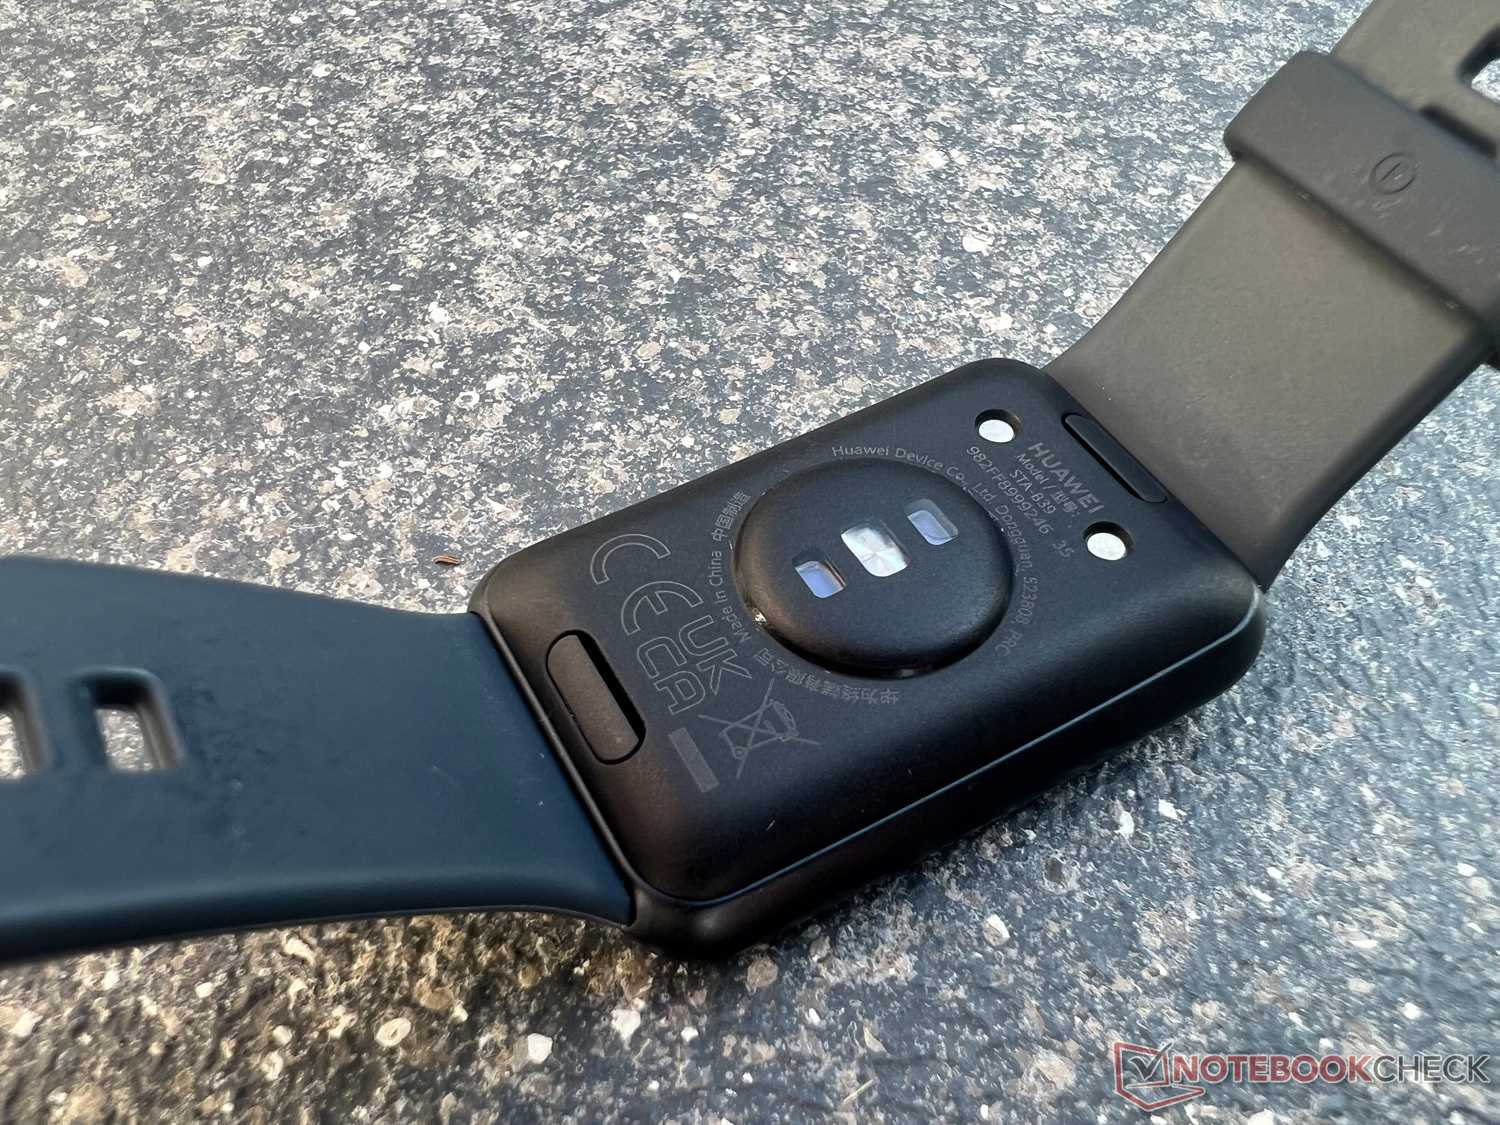 HUAWEI Watch Fit review: The skinny Apple Watch